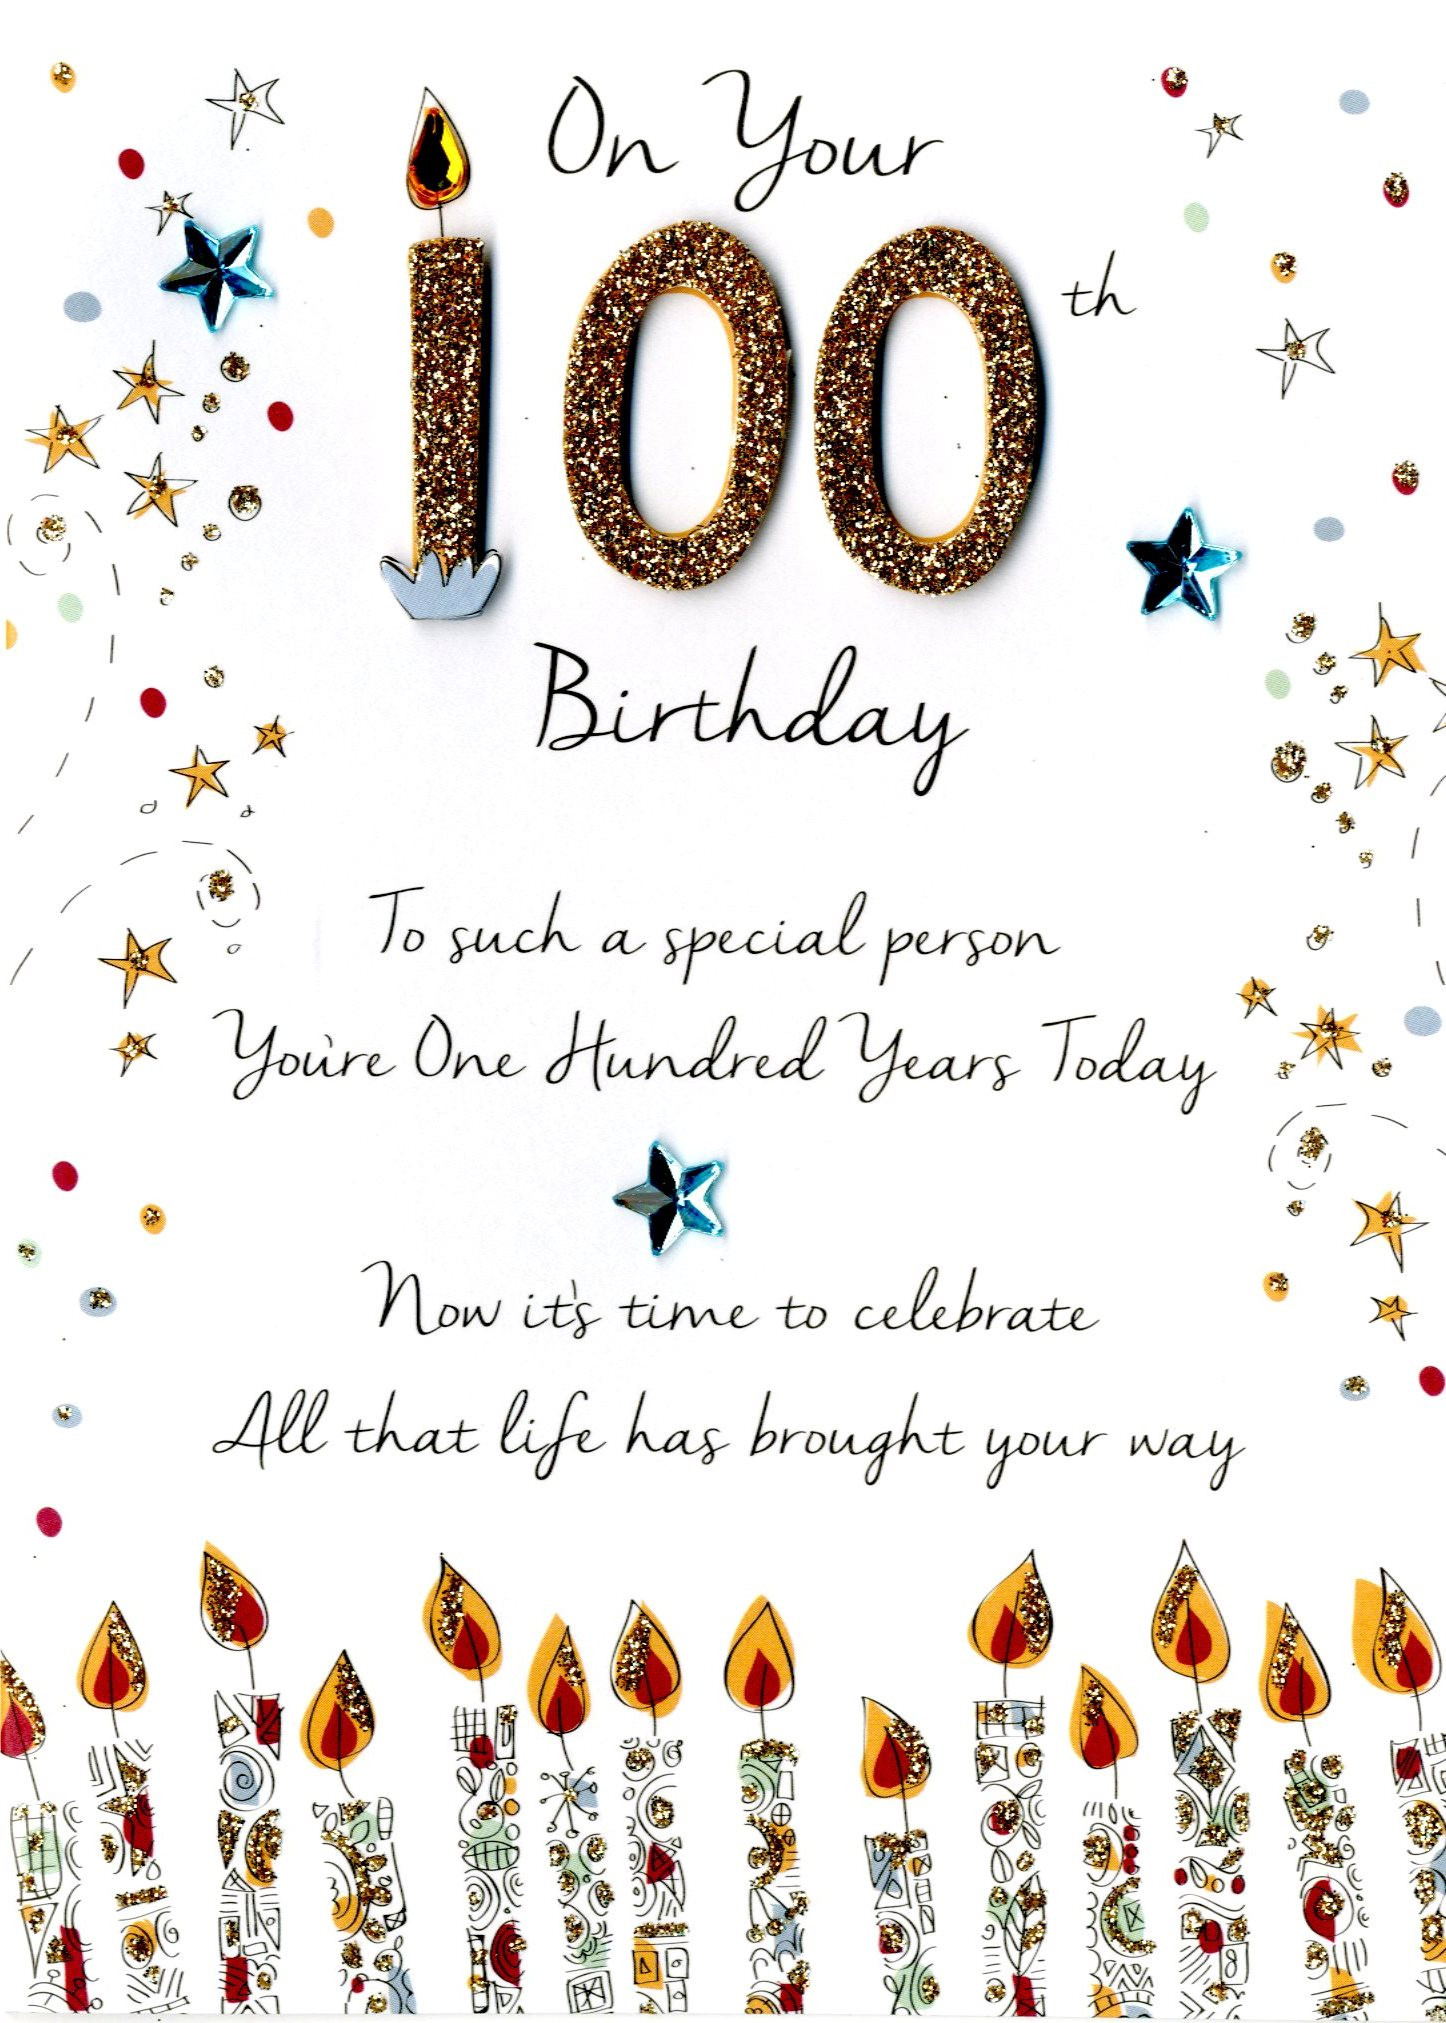 22-ideas-for-100th-birthday-card-home-family-style-and-art-ideas